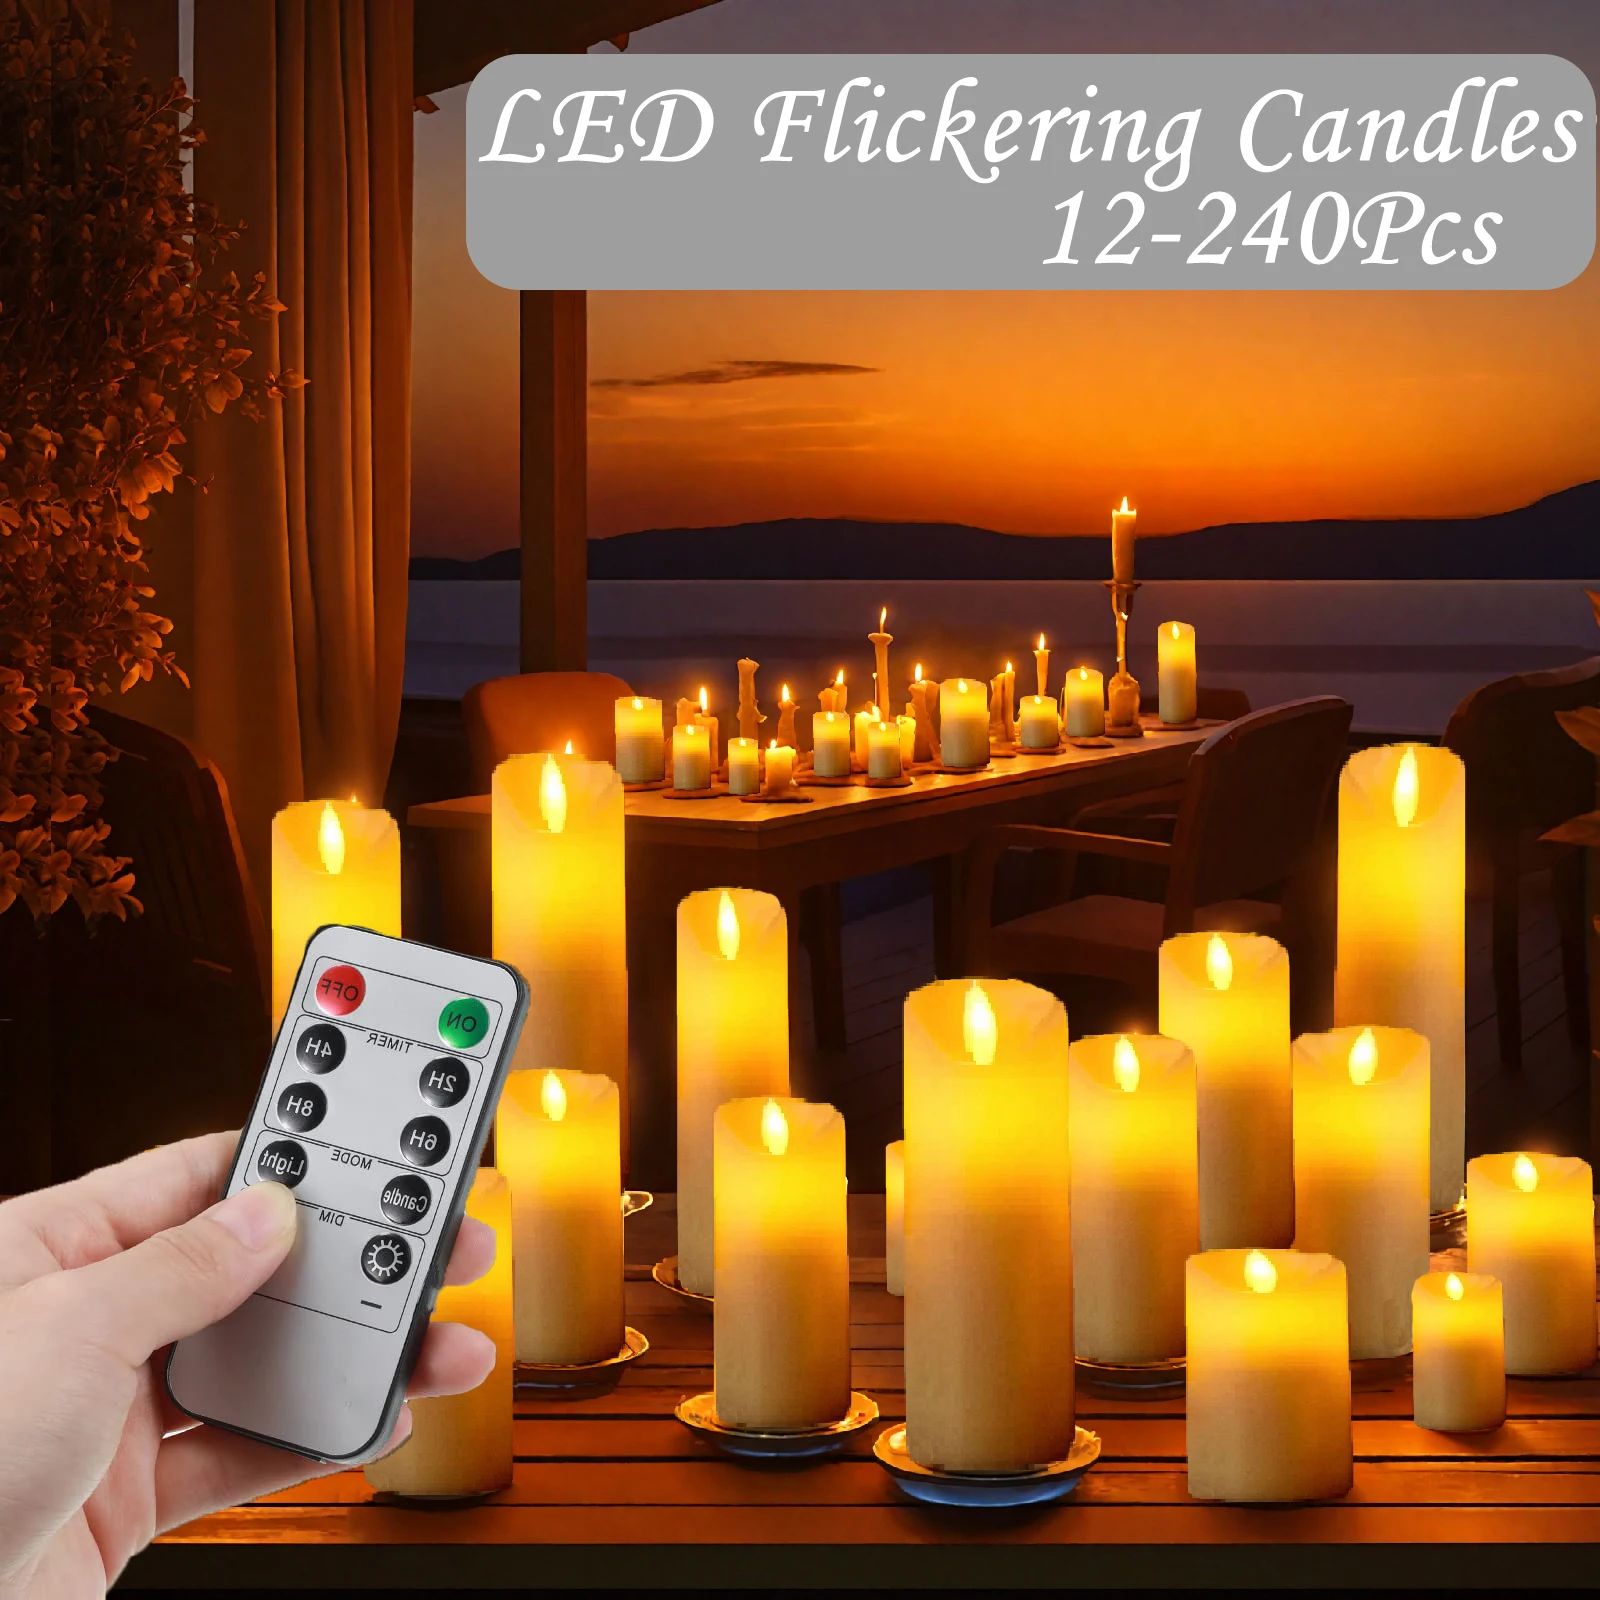 

12-240Pcs Flickering Wedding Candles Concert Center Flameless Candle with Remote Control Birthday Battery Operated LED Candles